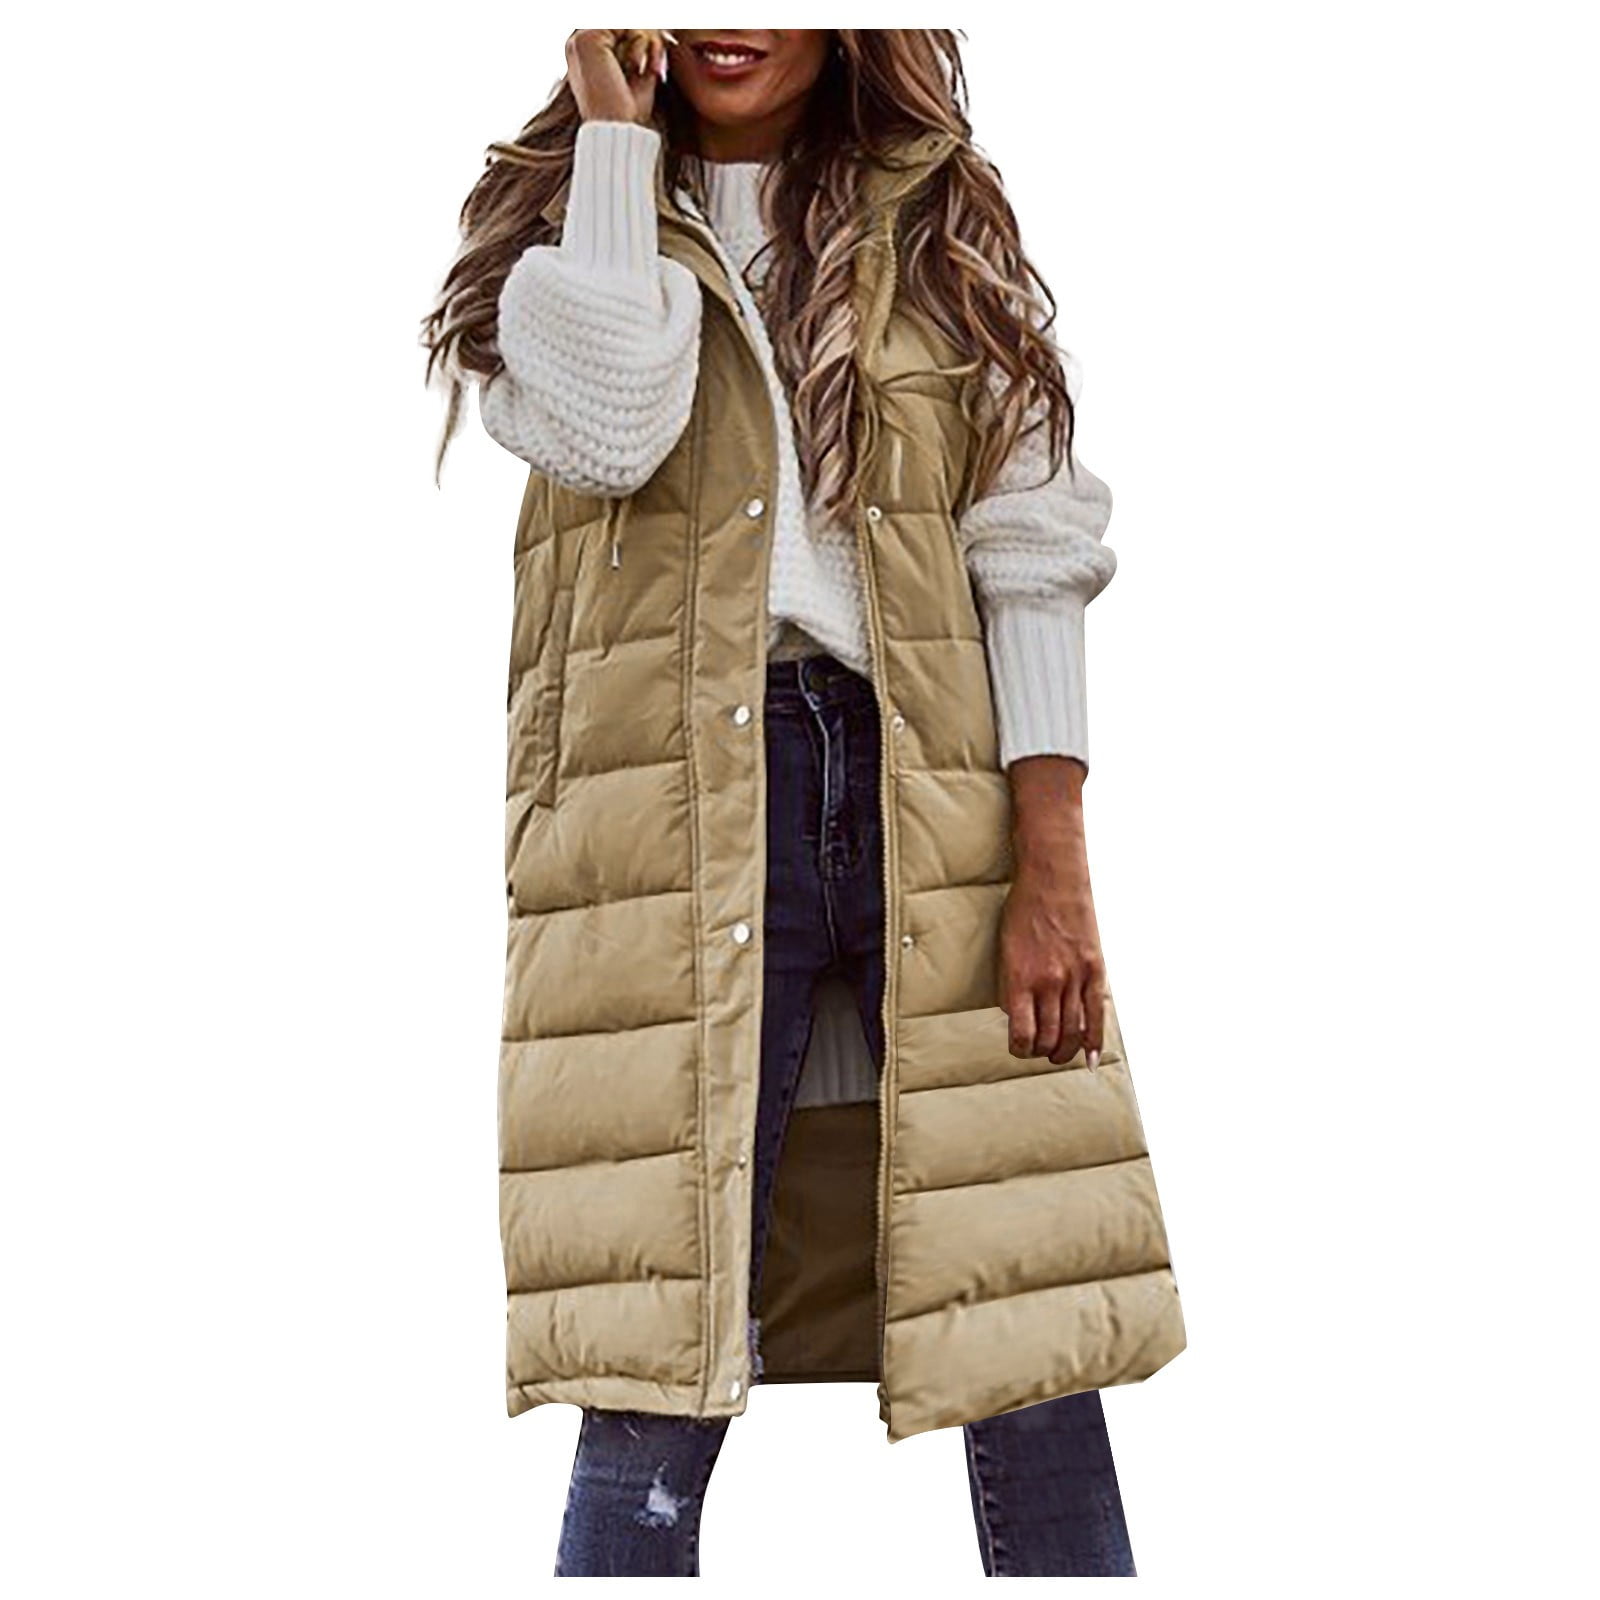 TQWQT Fall Reversible Vests for Women Sleeveless Fleece Jacket Zip Up  Hooded Vest Long Warm Winter Coat Comfy Outerwear Army Green M 